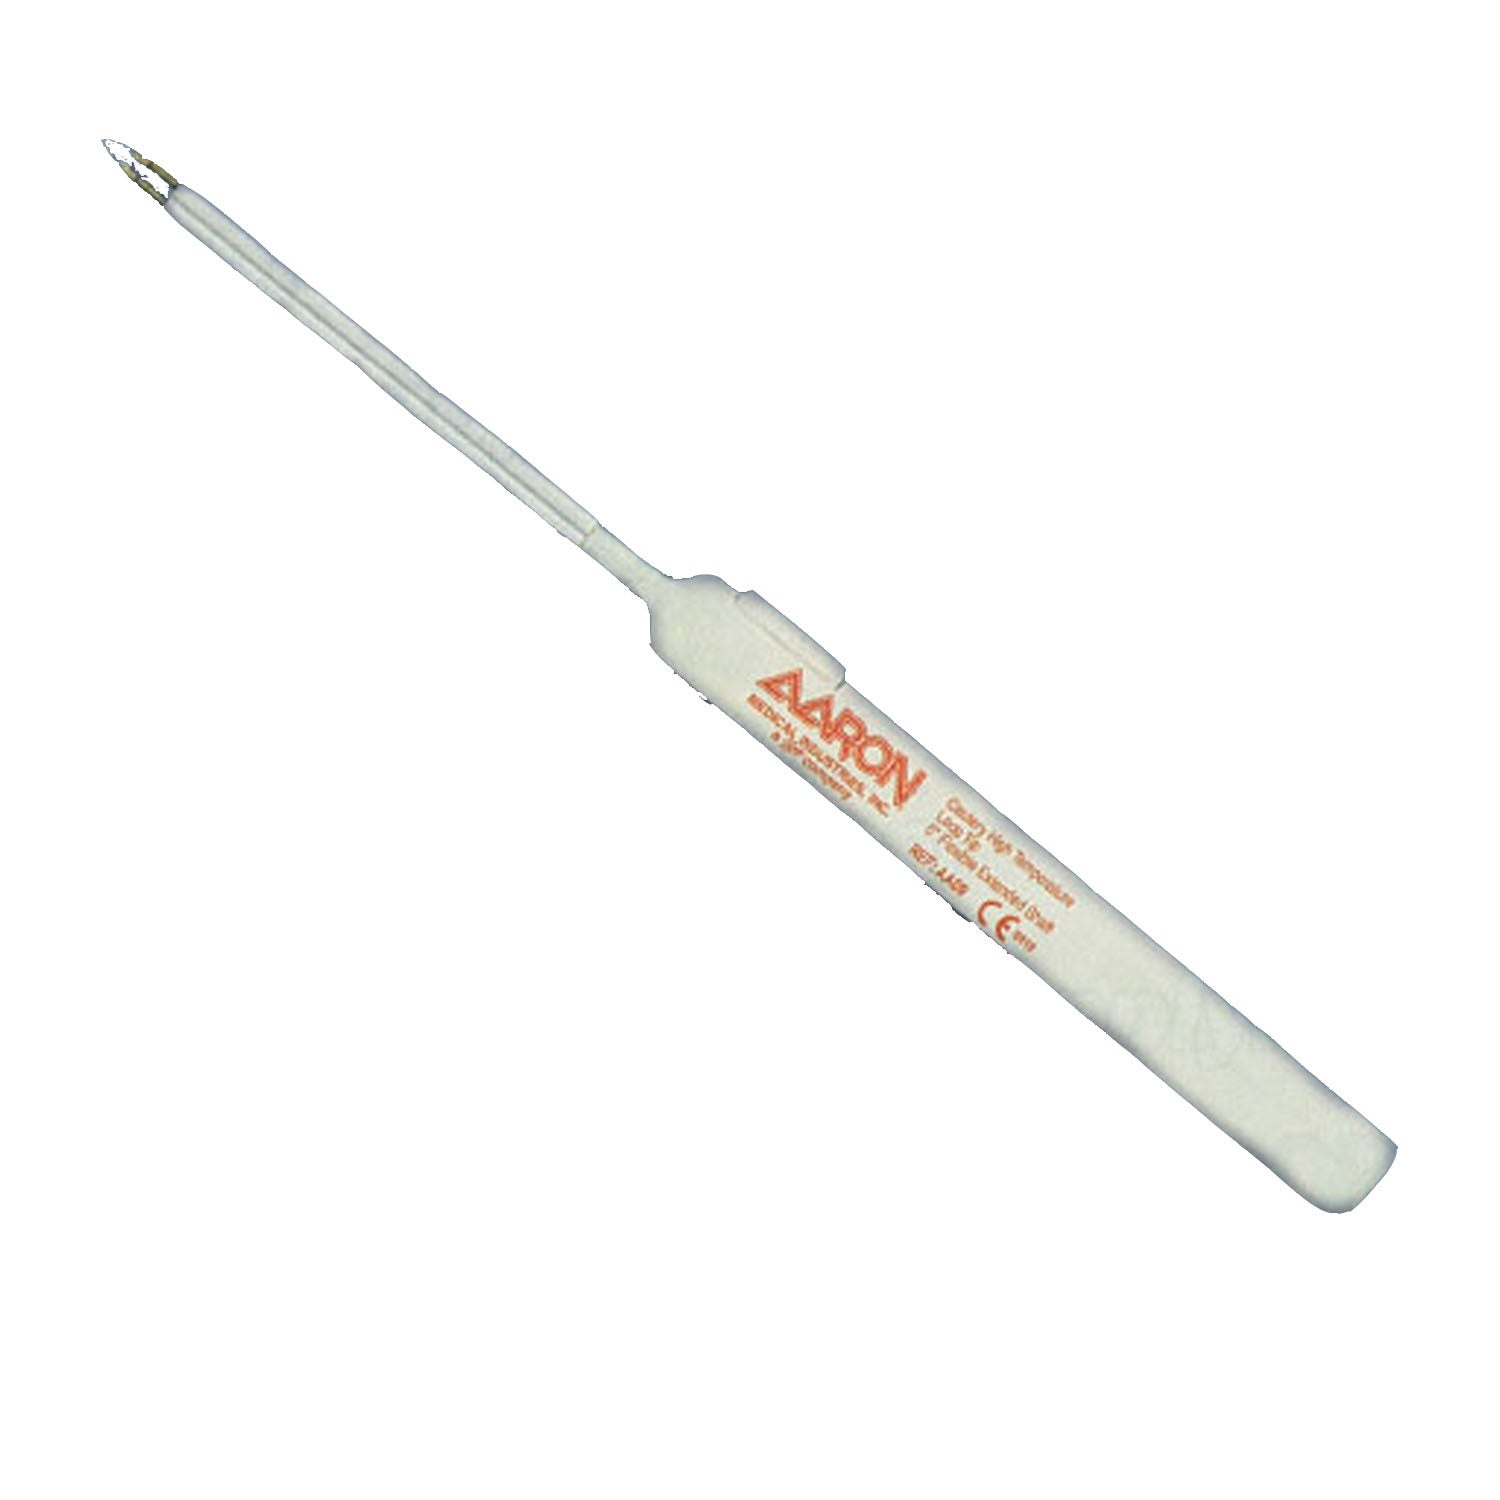 Bovie High Temperature Extended 5" Shaft Loop Tip Cautery | 2200°F/1204°C | Pack of 10 (1)